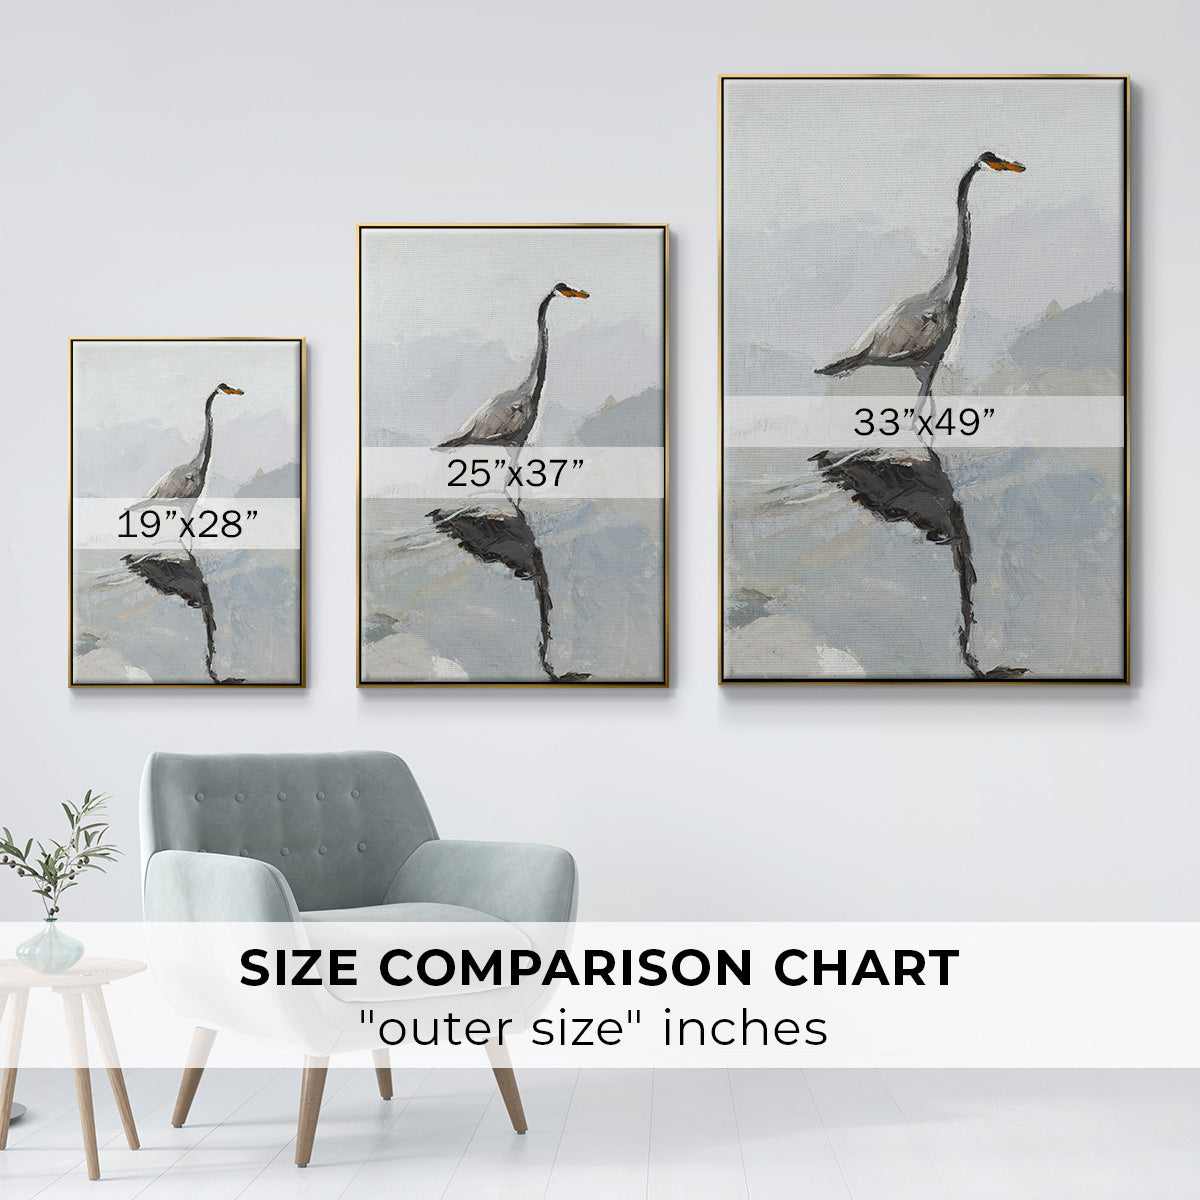 Heron - Framed Premium Gallery Wrapped Canvas L Frame - Ready to Hang